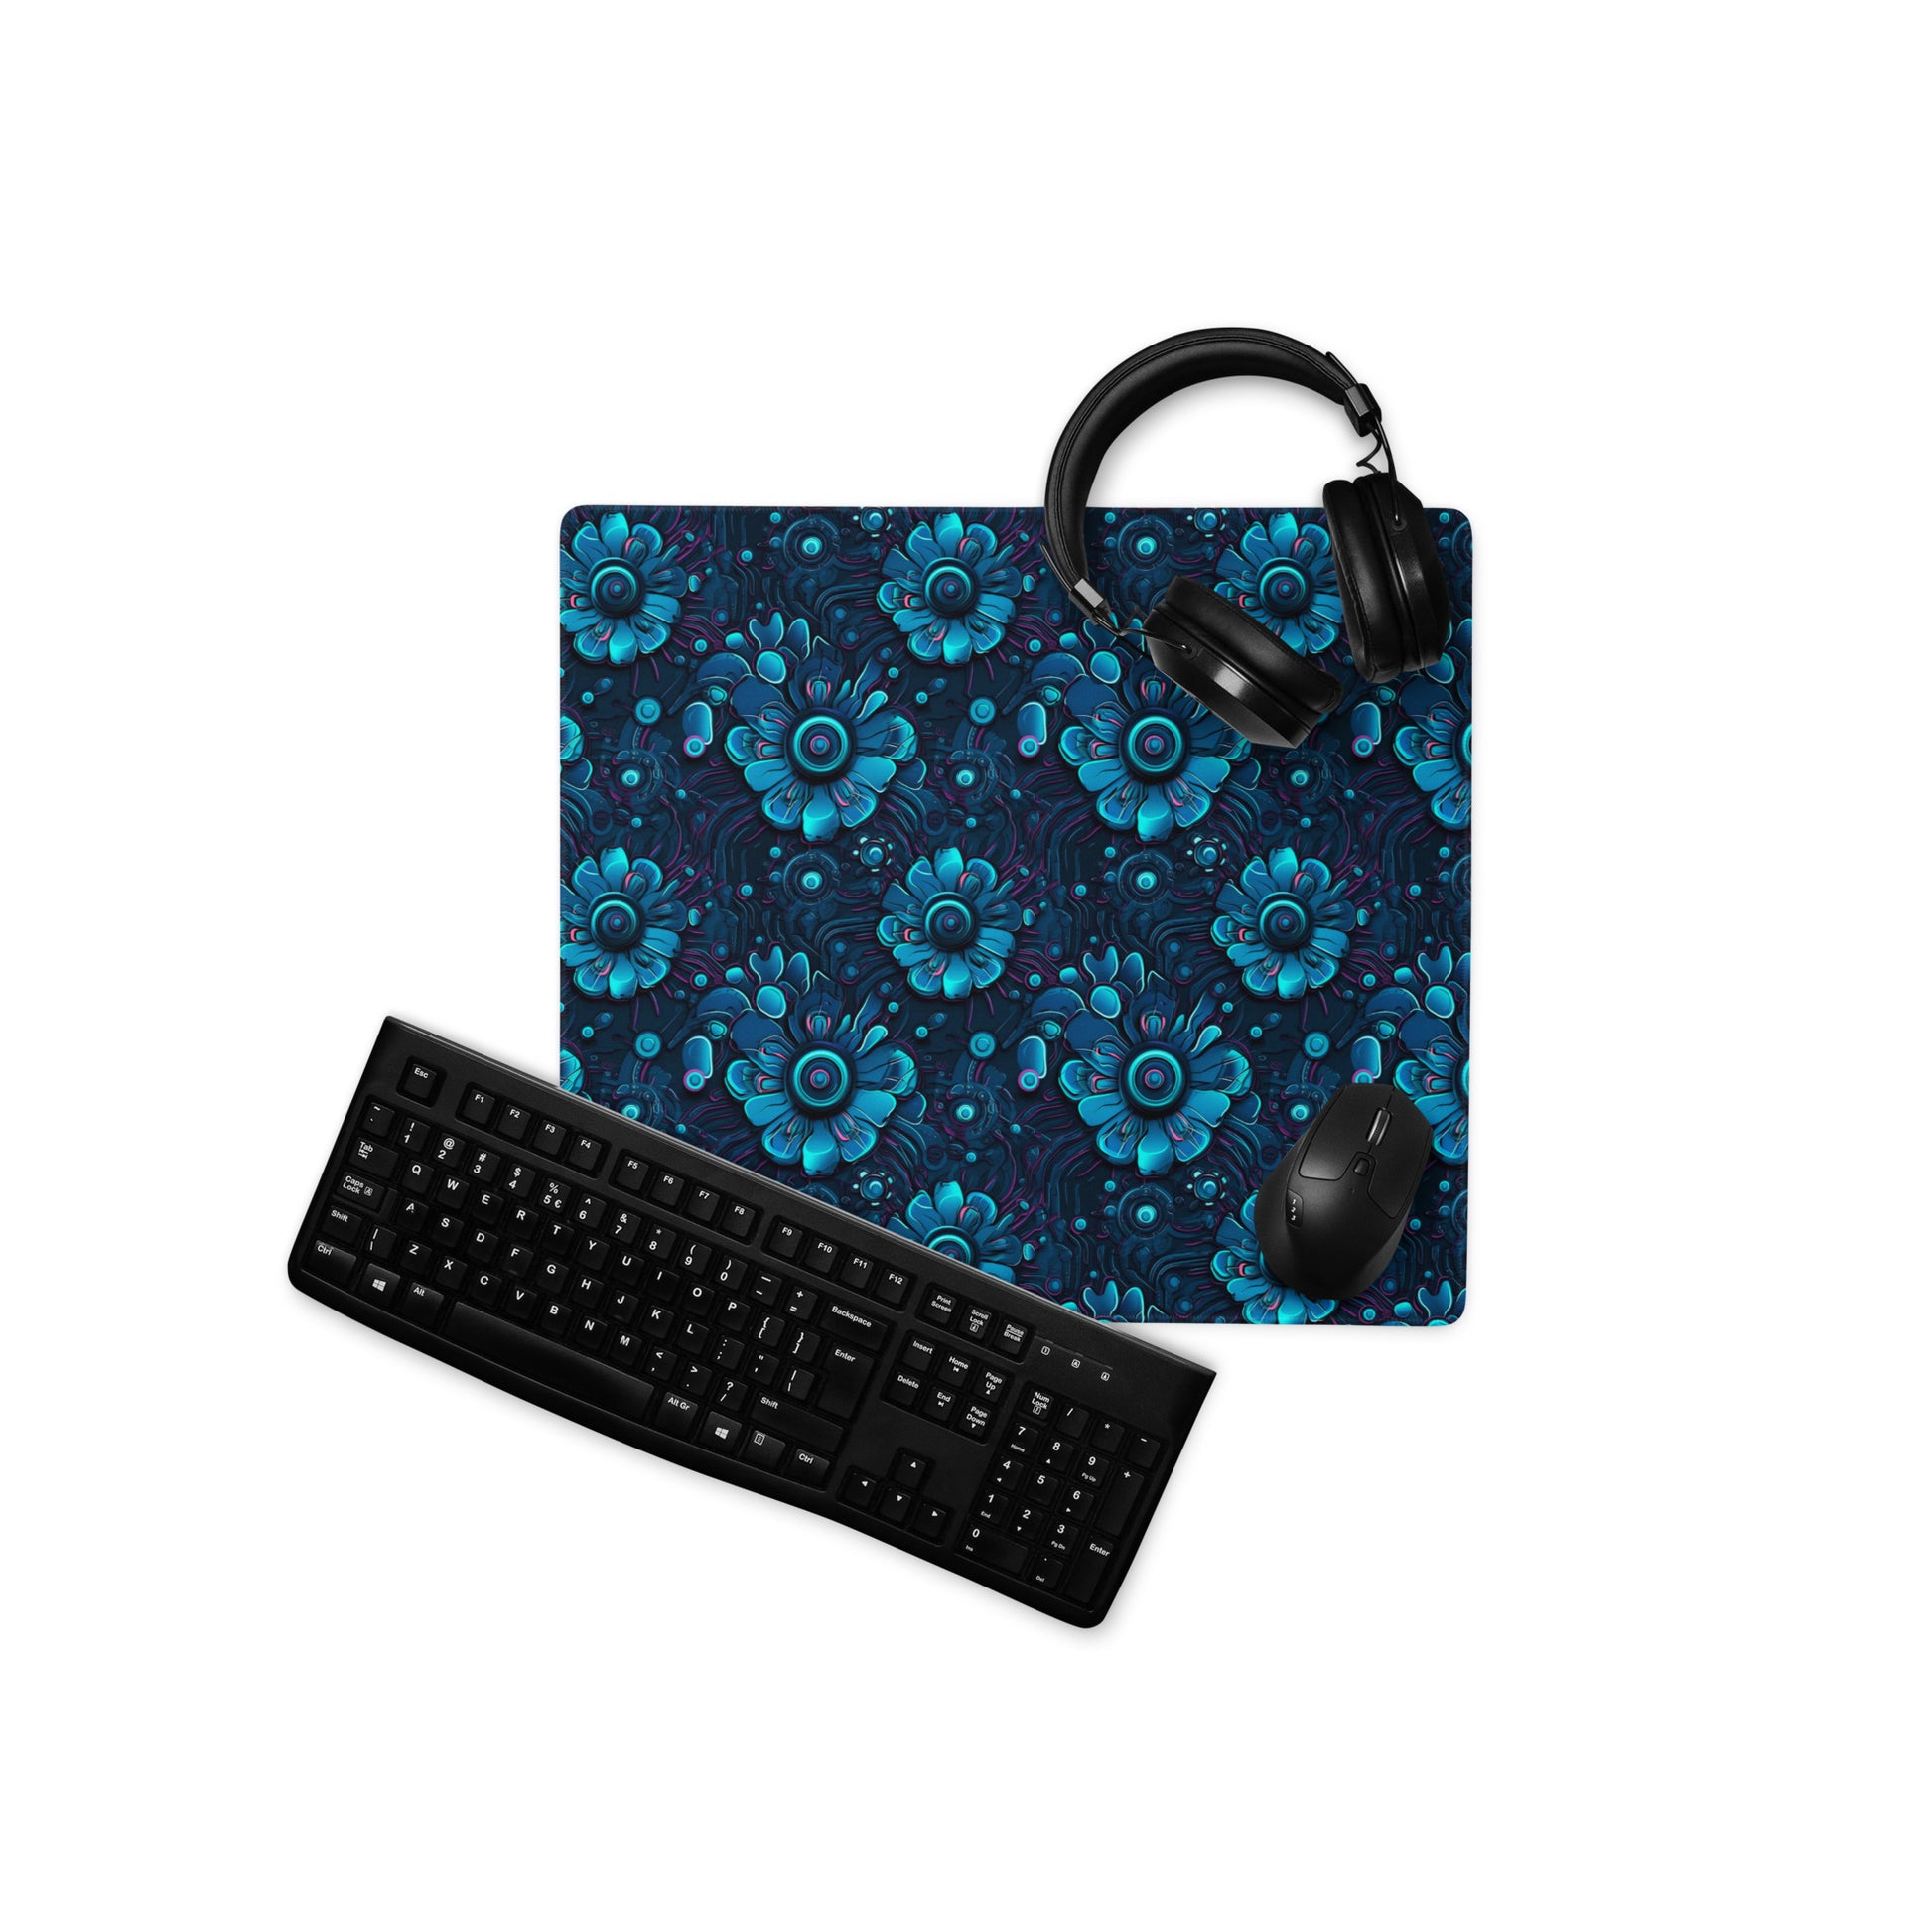 A 18" x 16" desk pad with a blue robotic floral pattern. With a keyboard, mouse, and headphones sitting on it.